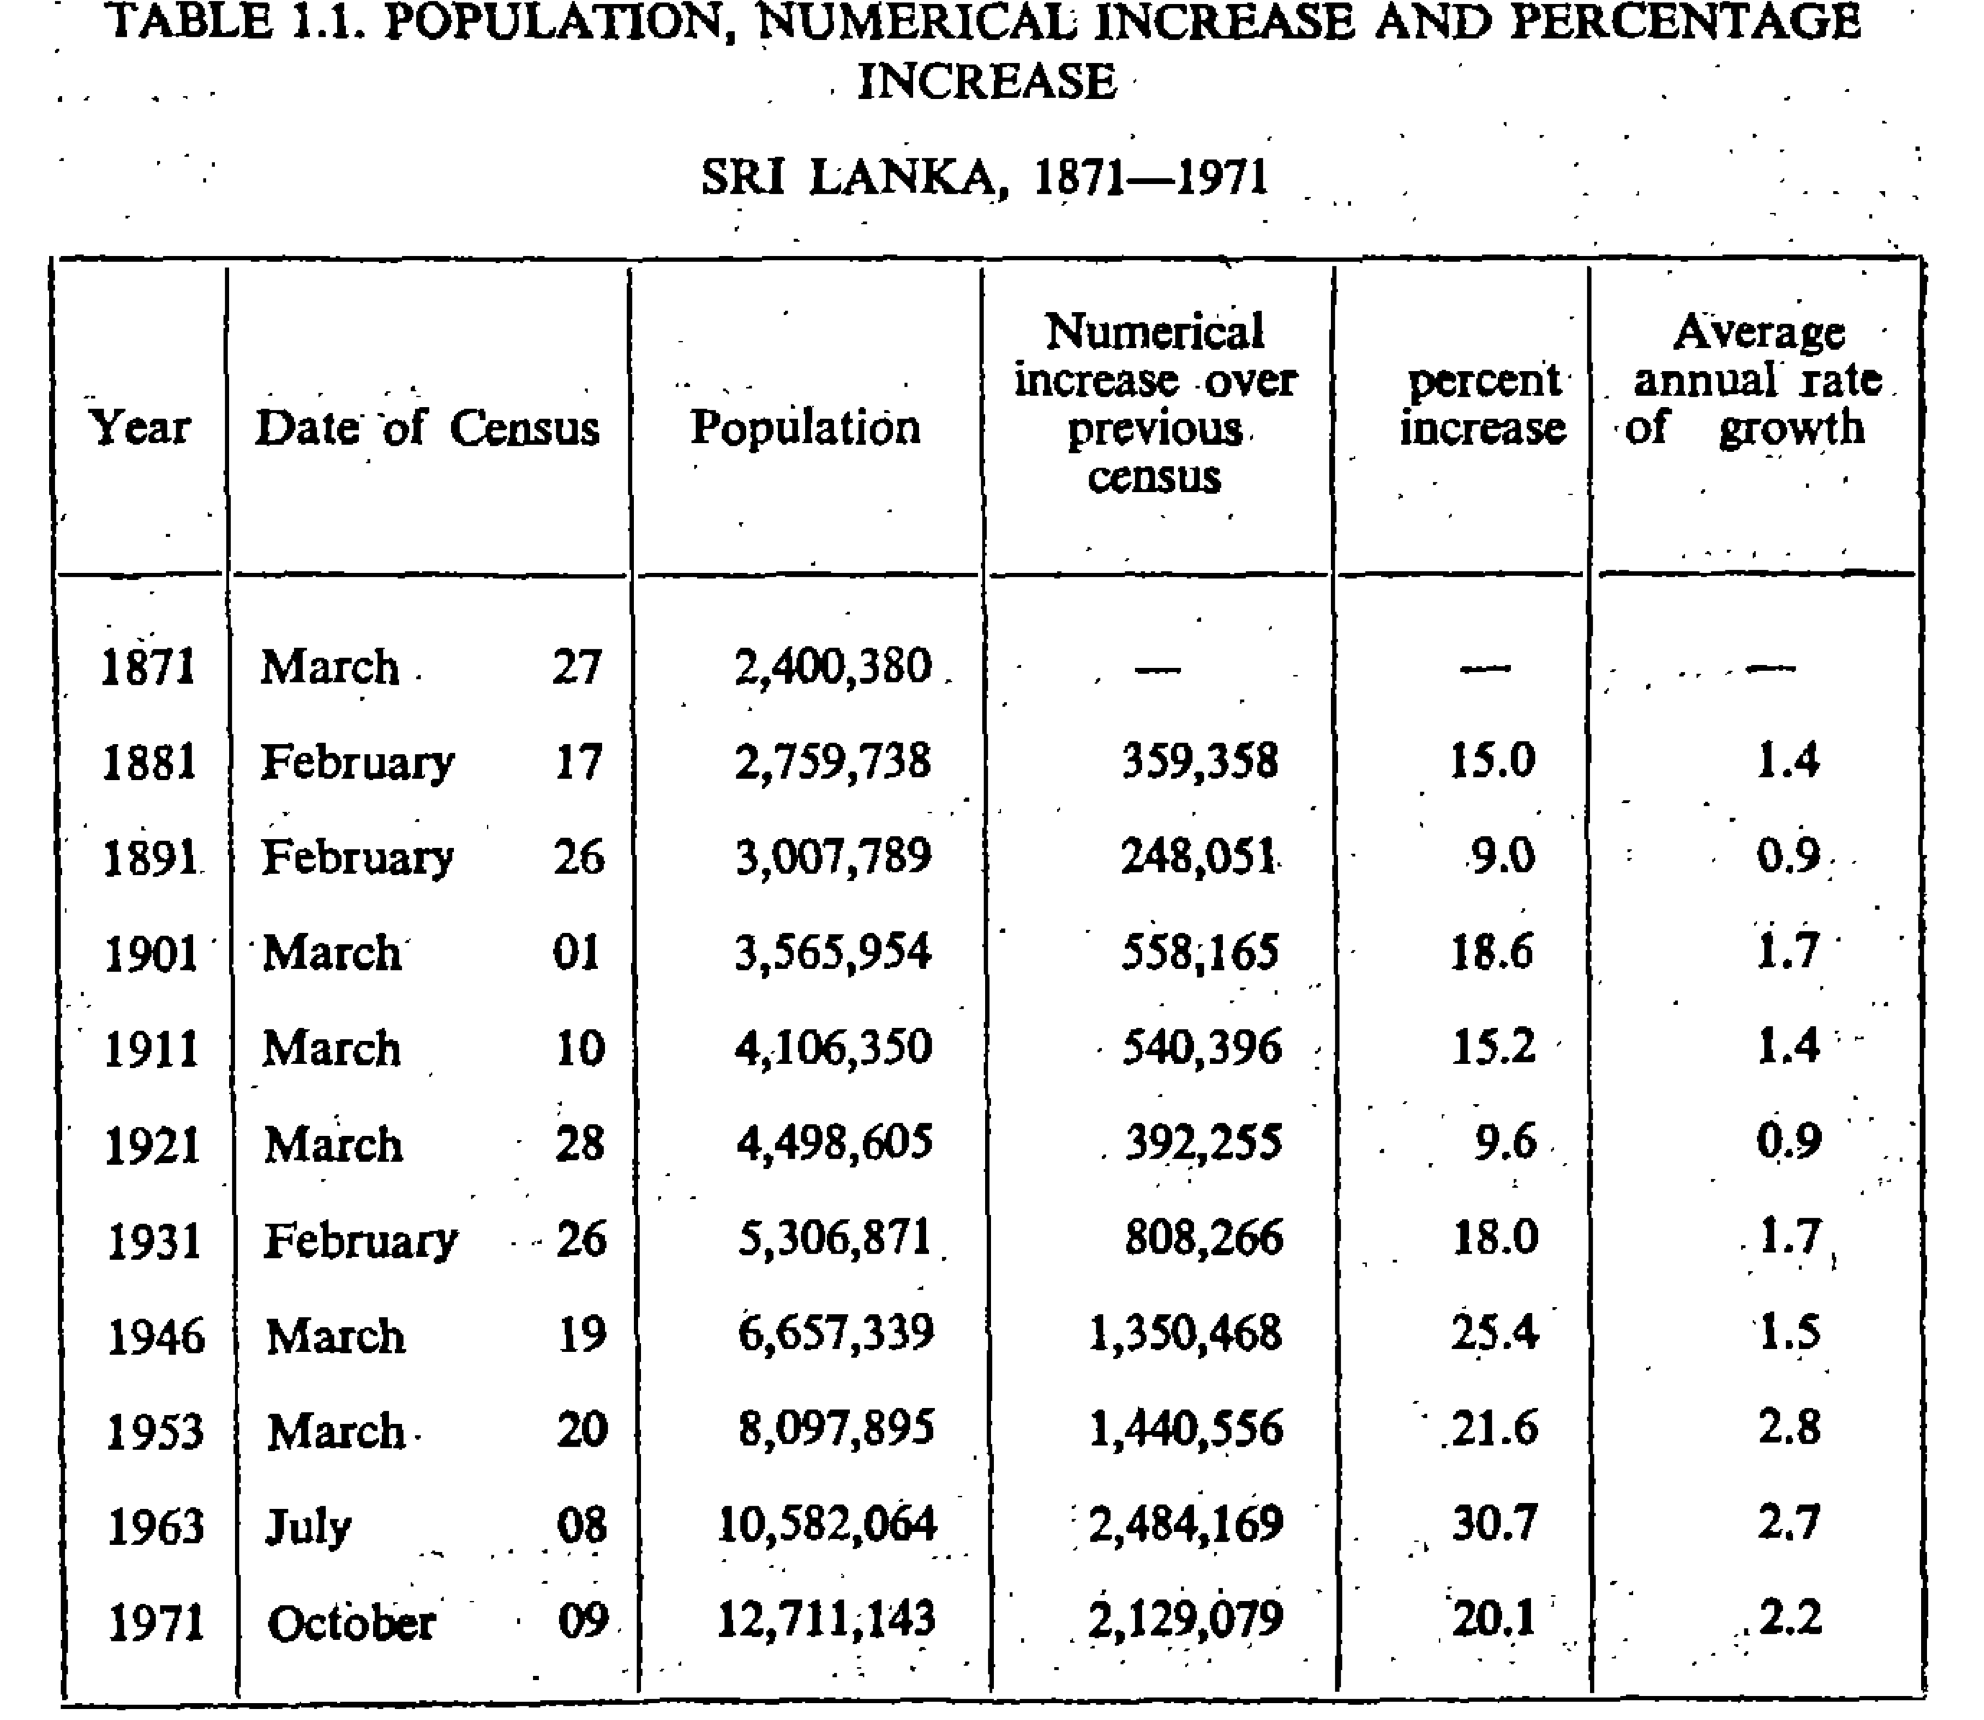 Table showing the population counts of Sri Lanka from 1871 (2.4 million) to 1971 (12.7 million)